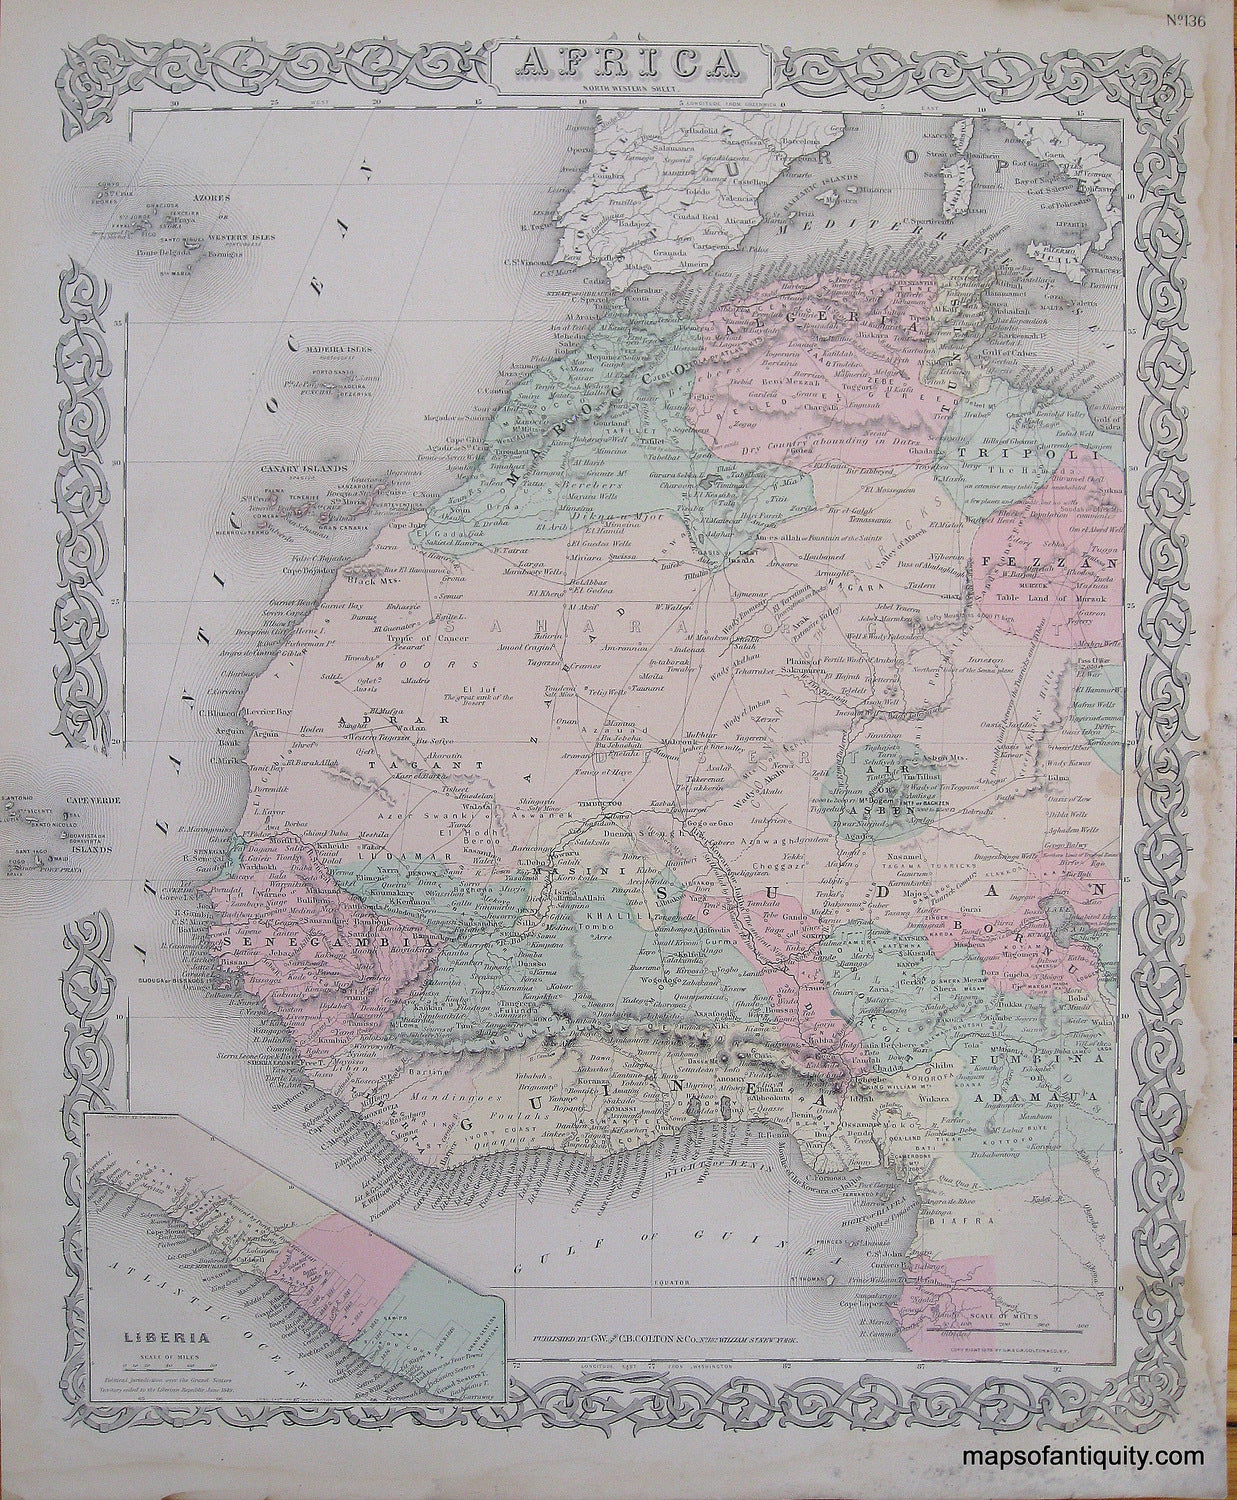 Antique-Hand-Colored-Map-Colton's-Africa-North-Western-Sheet-Africa-Africa-General-1887-Colton-Maps-Of-Antiquity